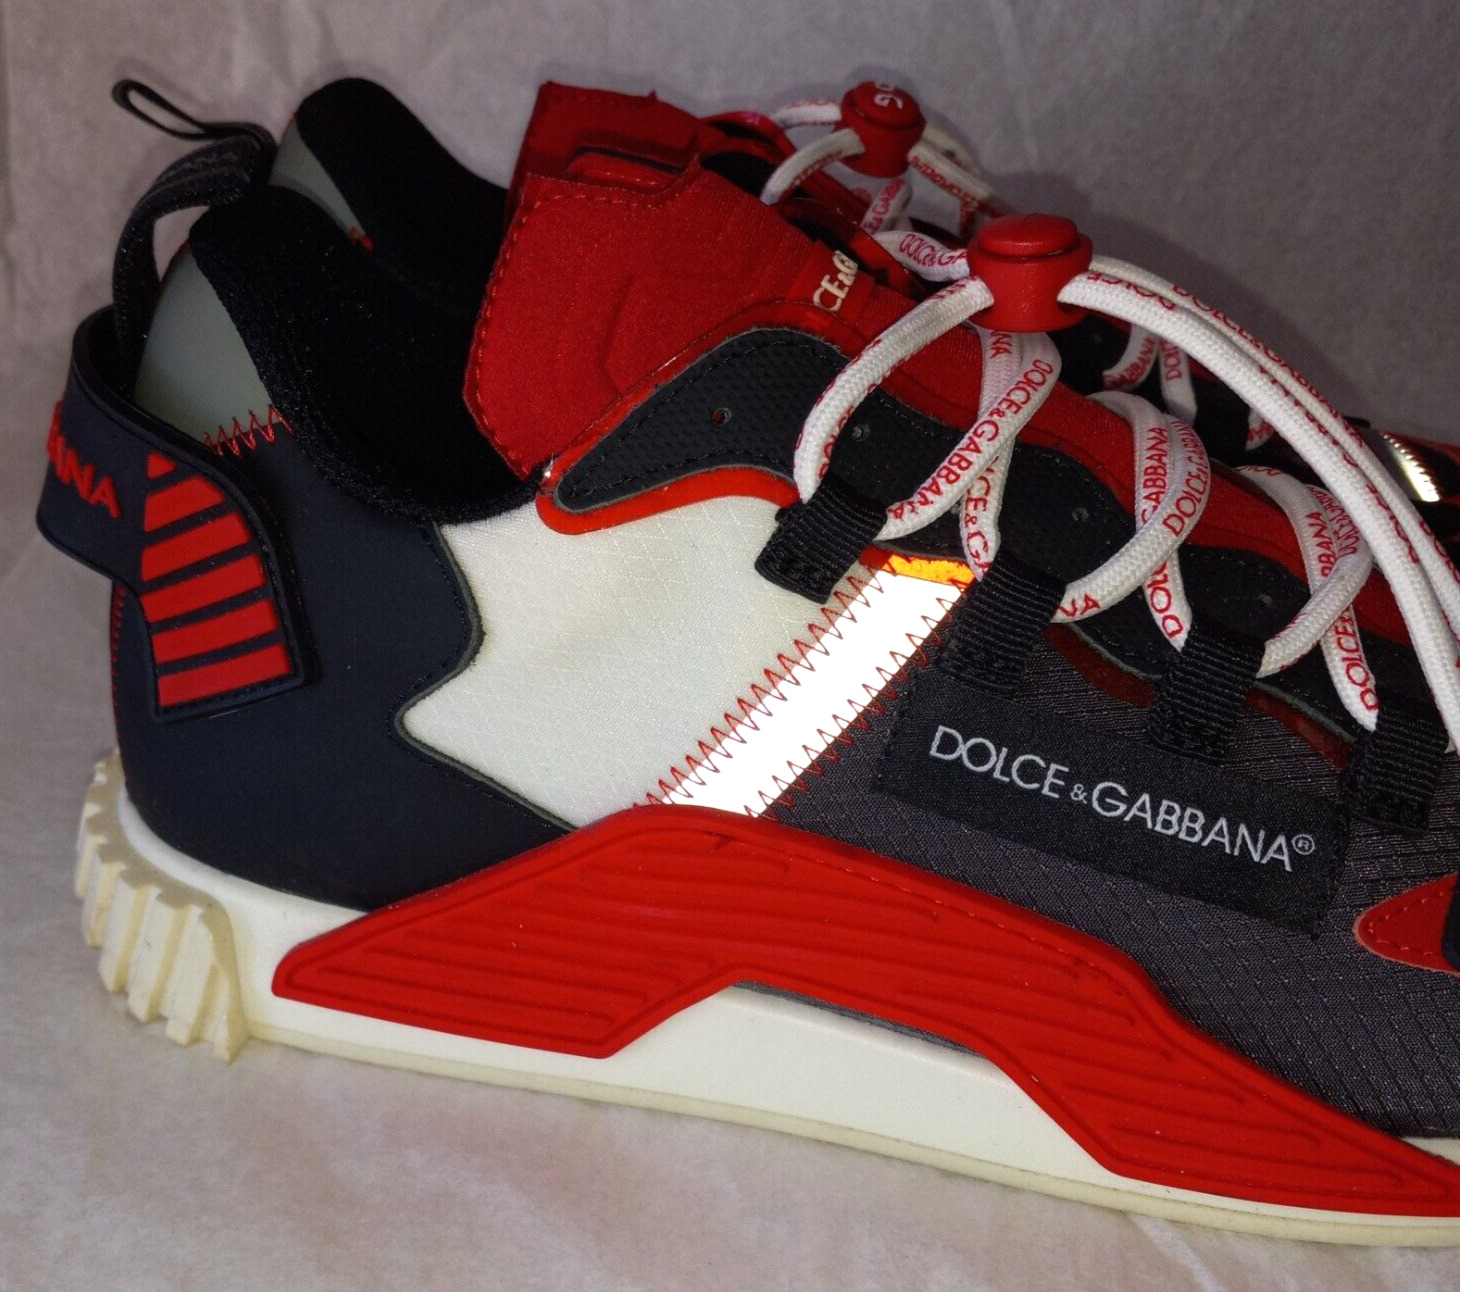 DOLCE & GABBANA NS1 BLACK/RED/WHITE SNEAKERS SIZE… - image 5